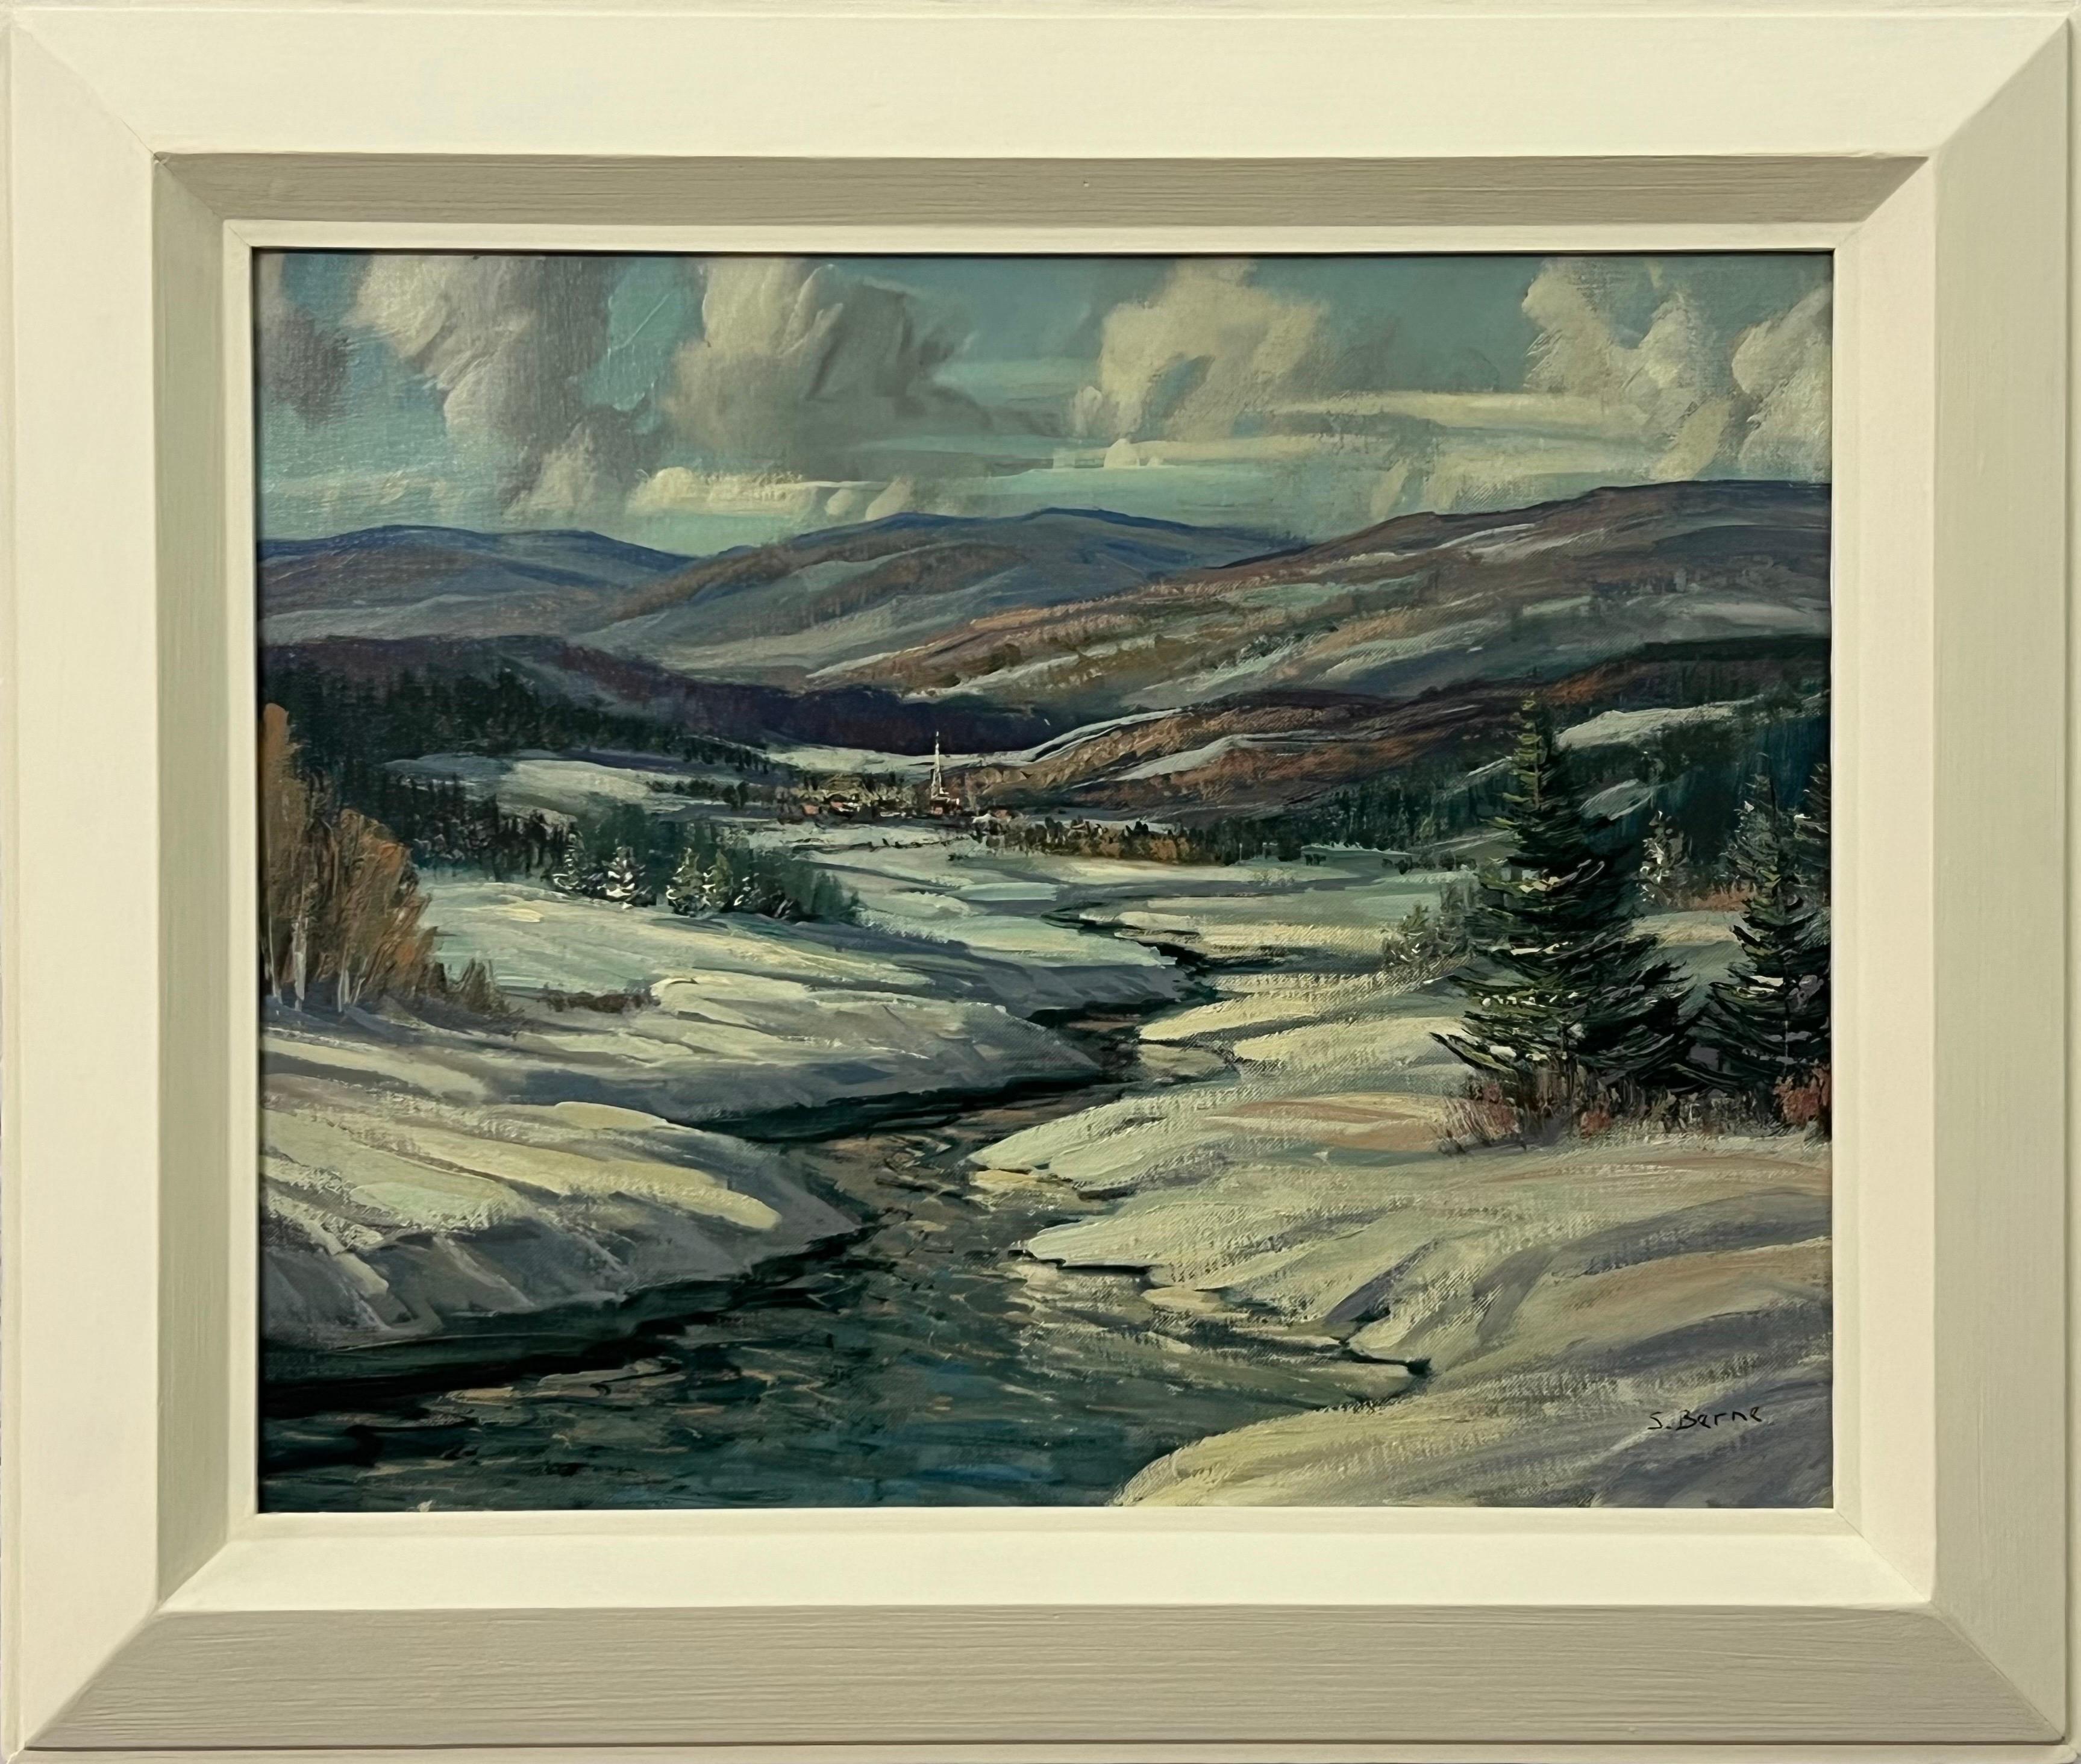 Sydney Berne Figurative Painting - Vintage Winter Snowy River Mountain Landscape of Canada by 20th Century Artist